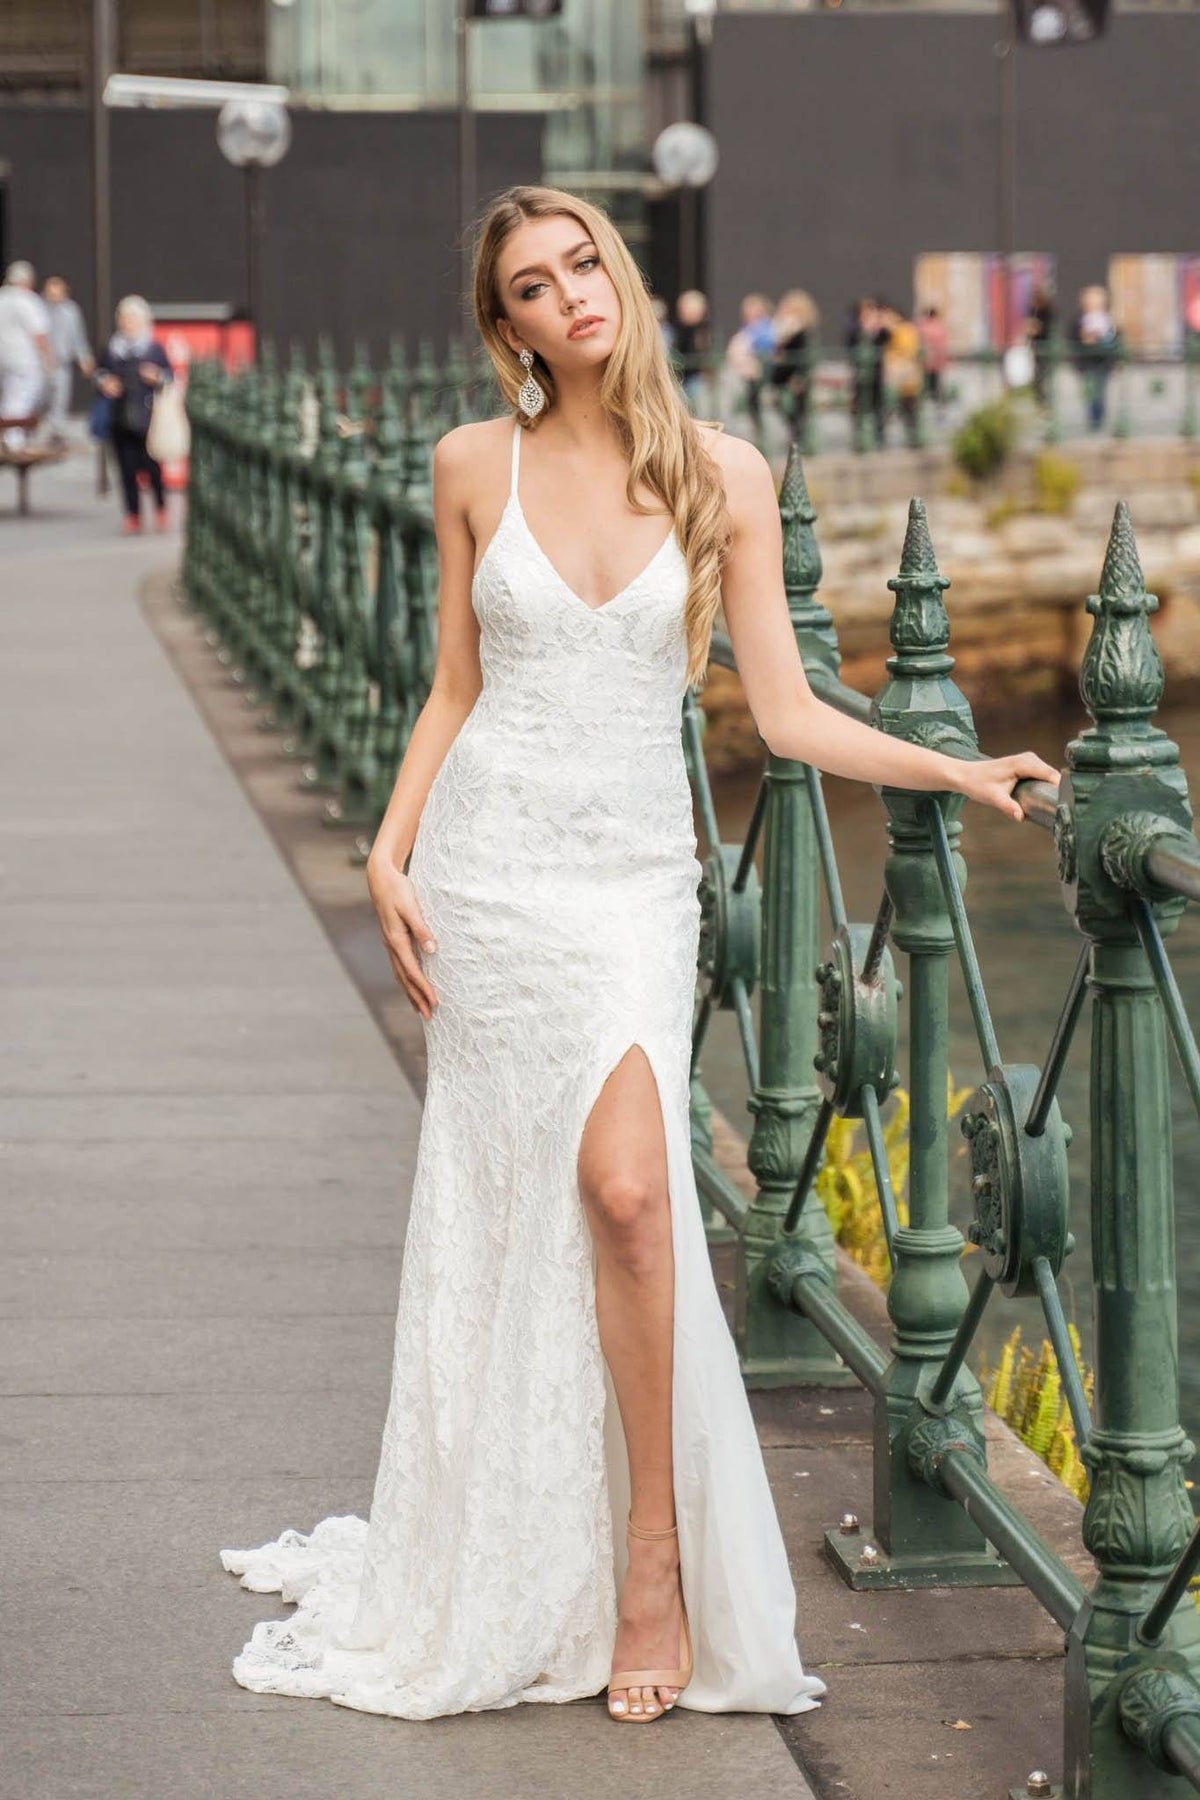 White lace mermaid long evening gown with leg split, lace up back, and long train 